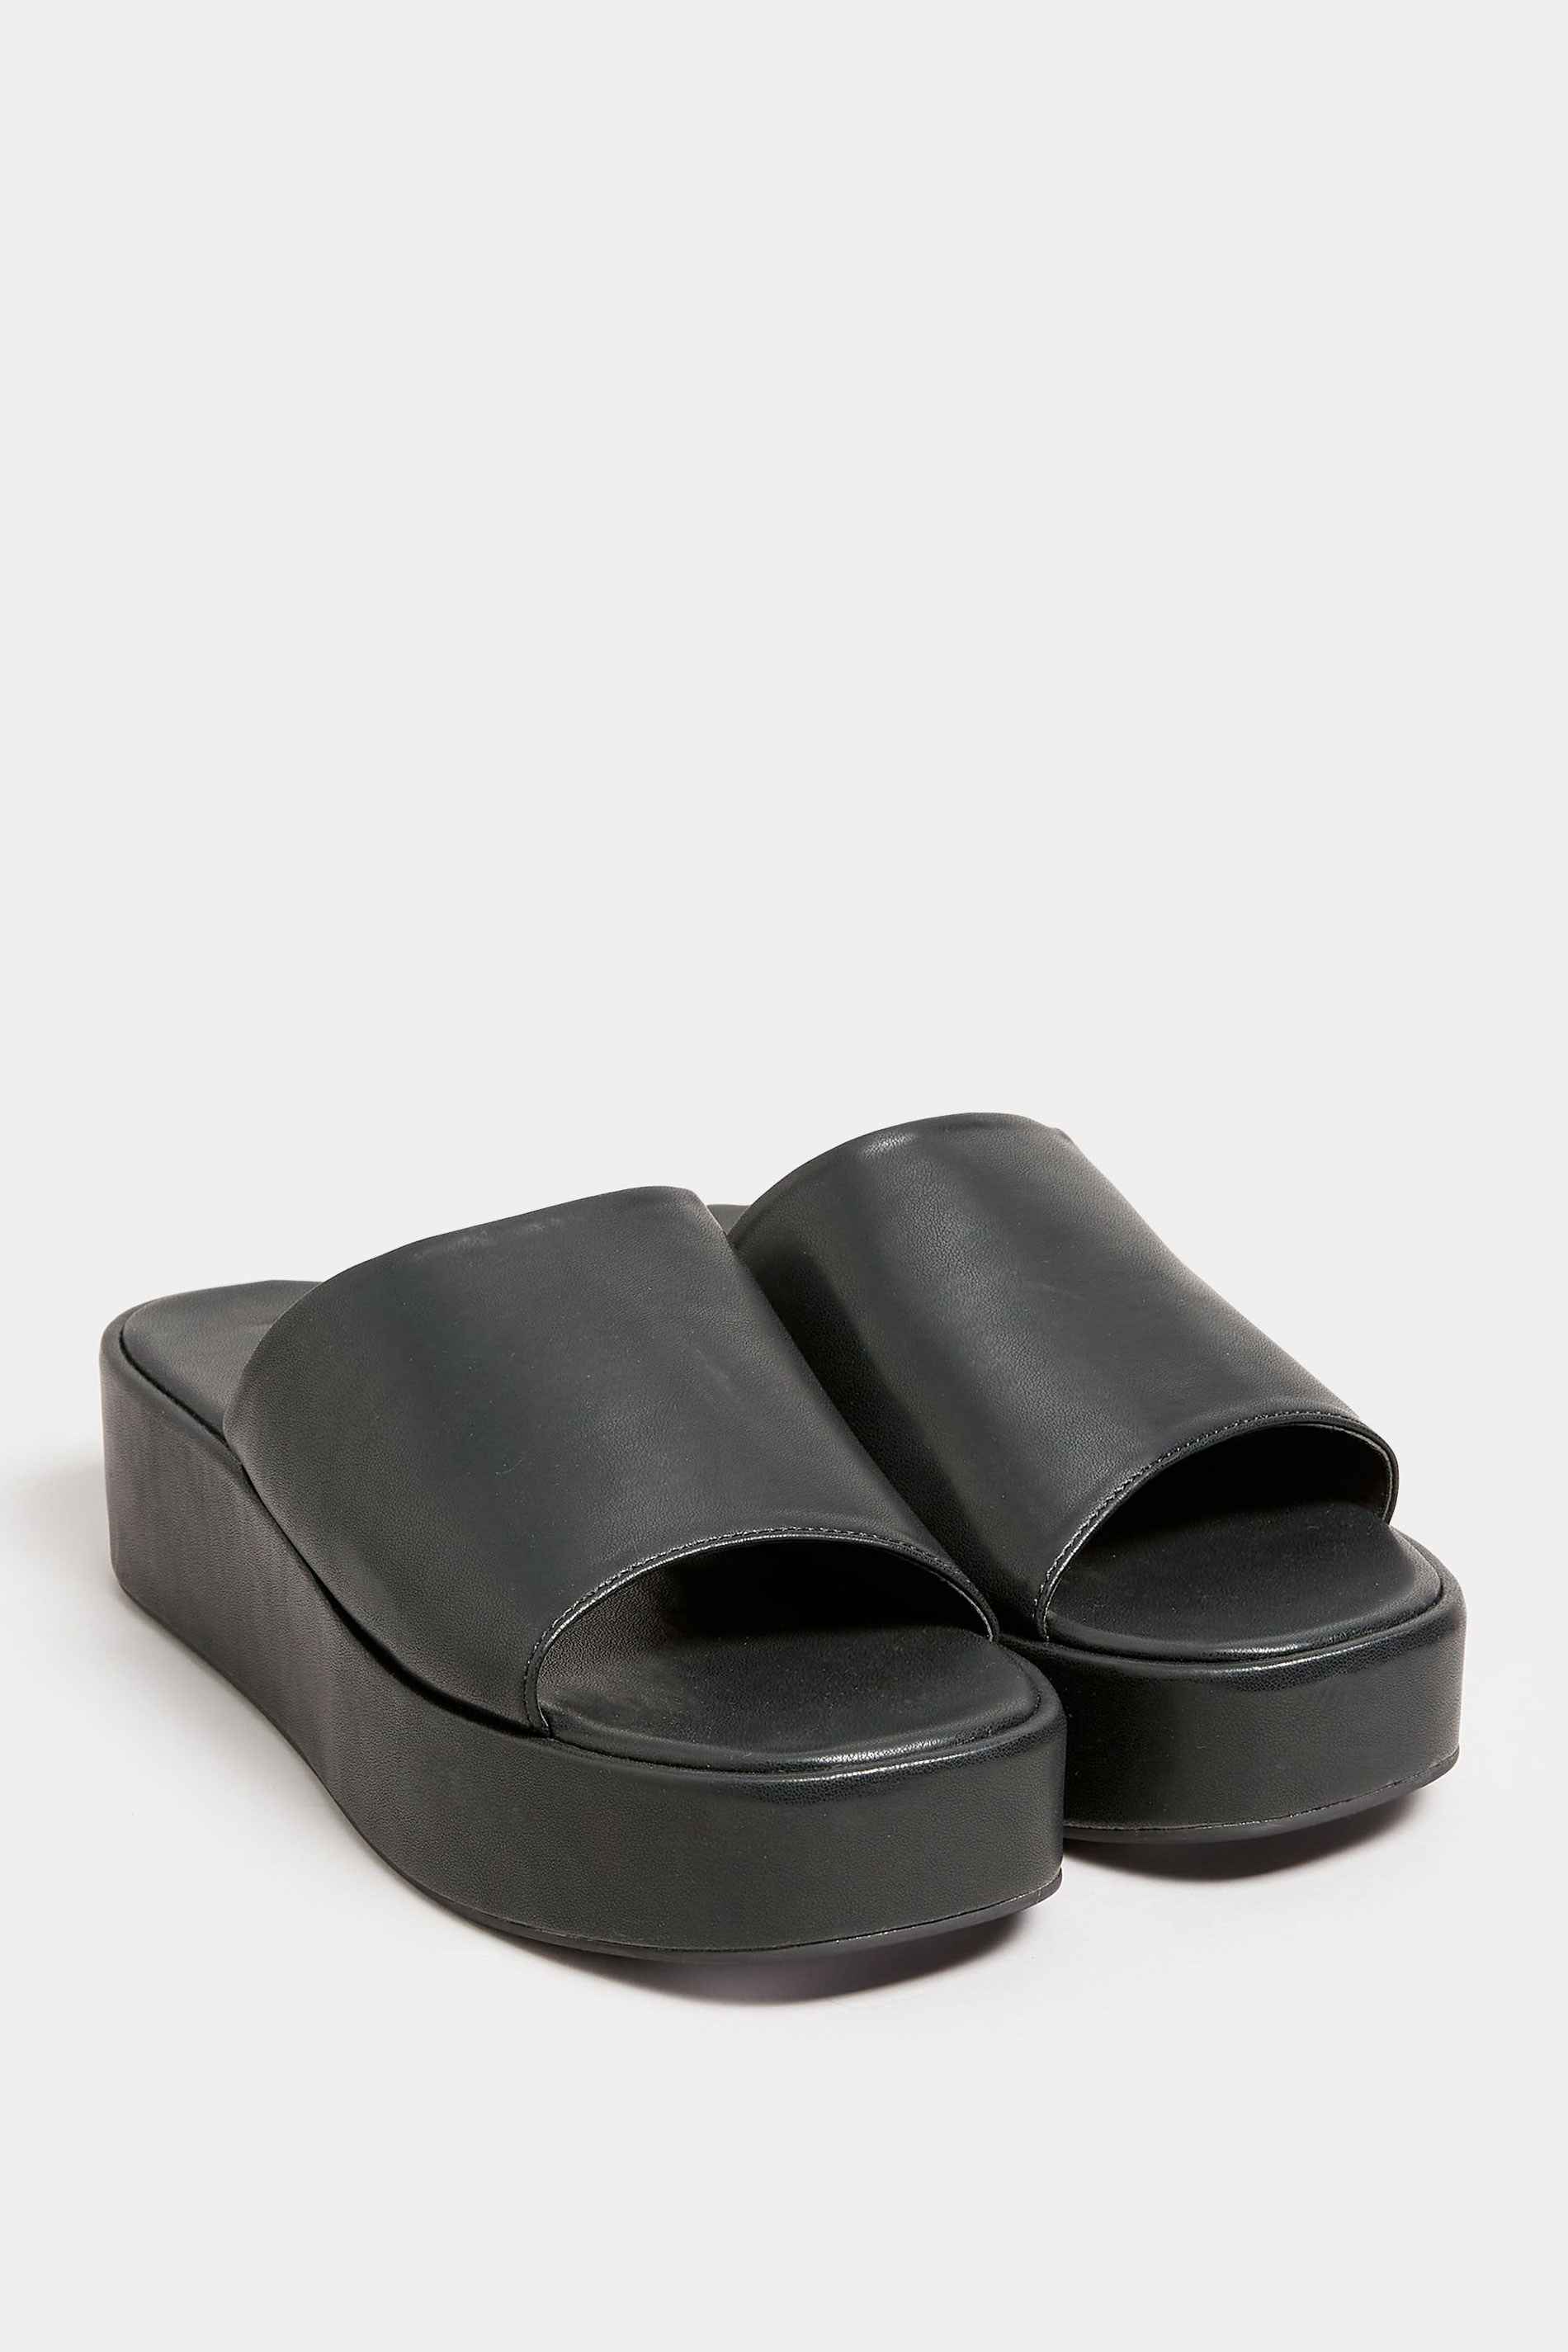 LIMITED COLLECTION Black Platform Mule Sandals In E Wide Fit & EEE Extra Wide Fit 2